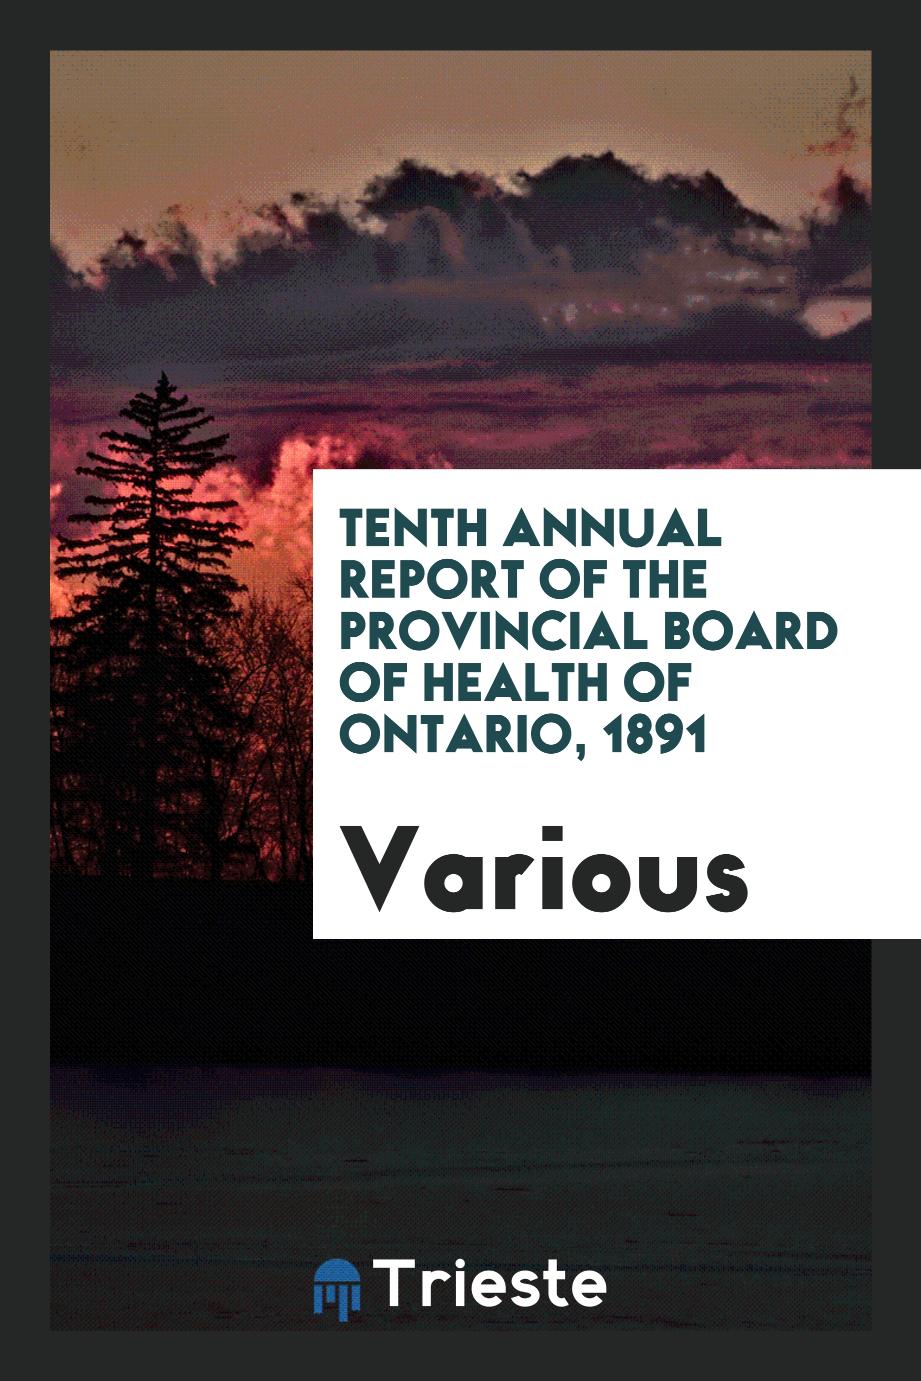 Tenth Annual Report of the Provincial Board of Health of Ontario, 1891